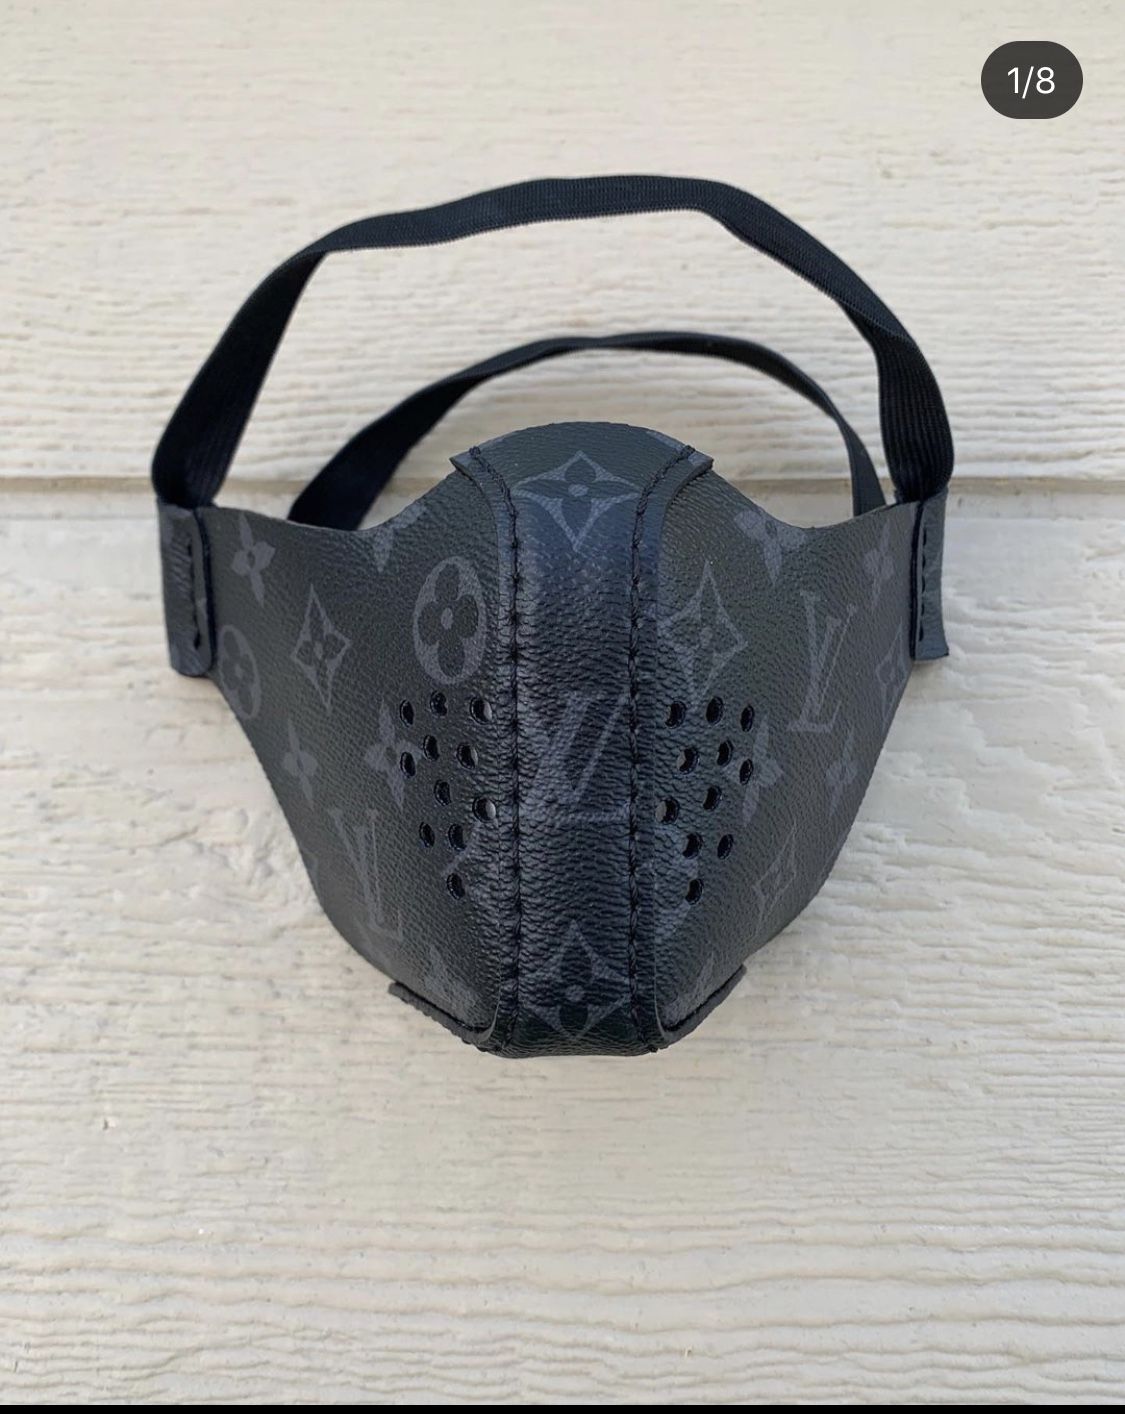 Authentic LV leather N95 face mask